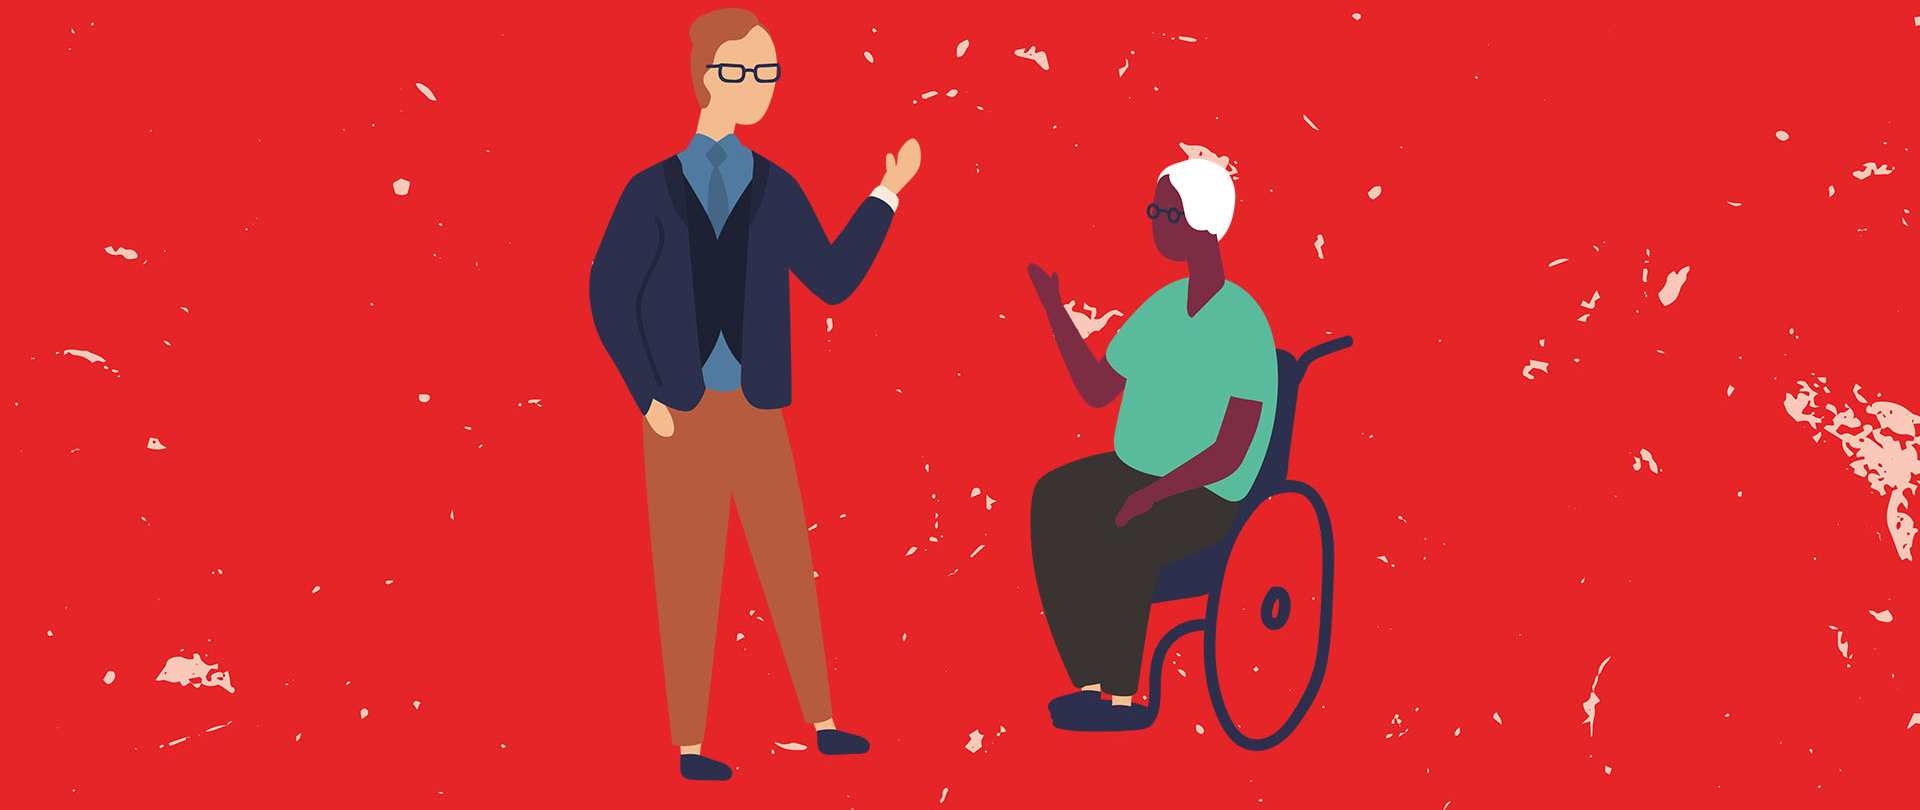 A man talking to another man in a wheelchair illustration